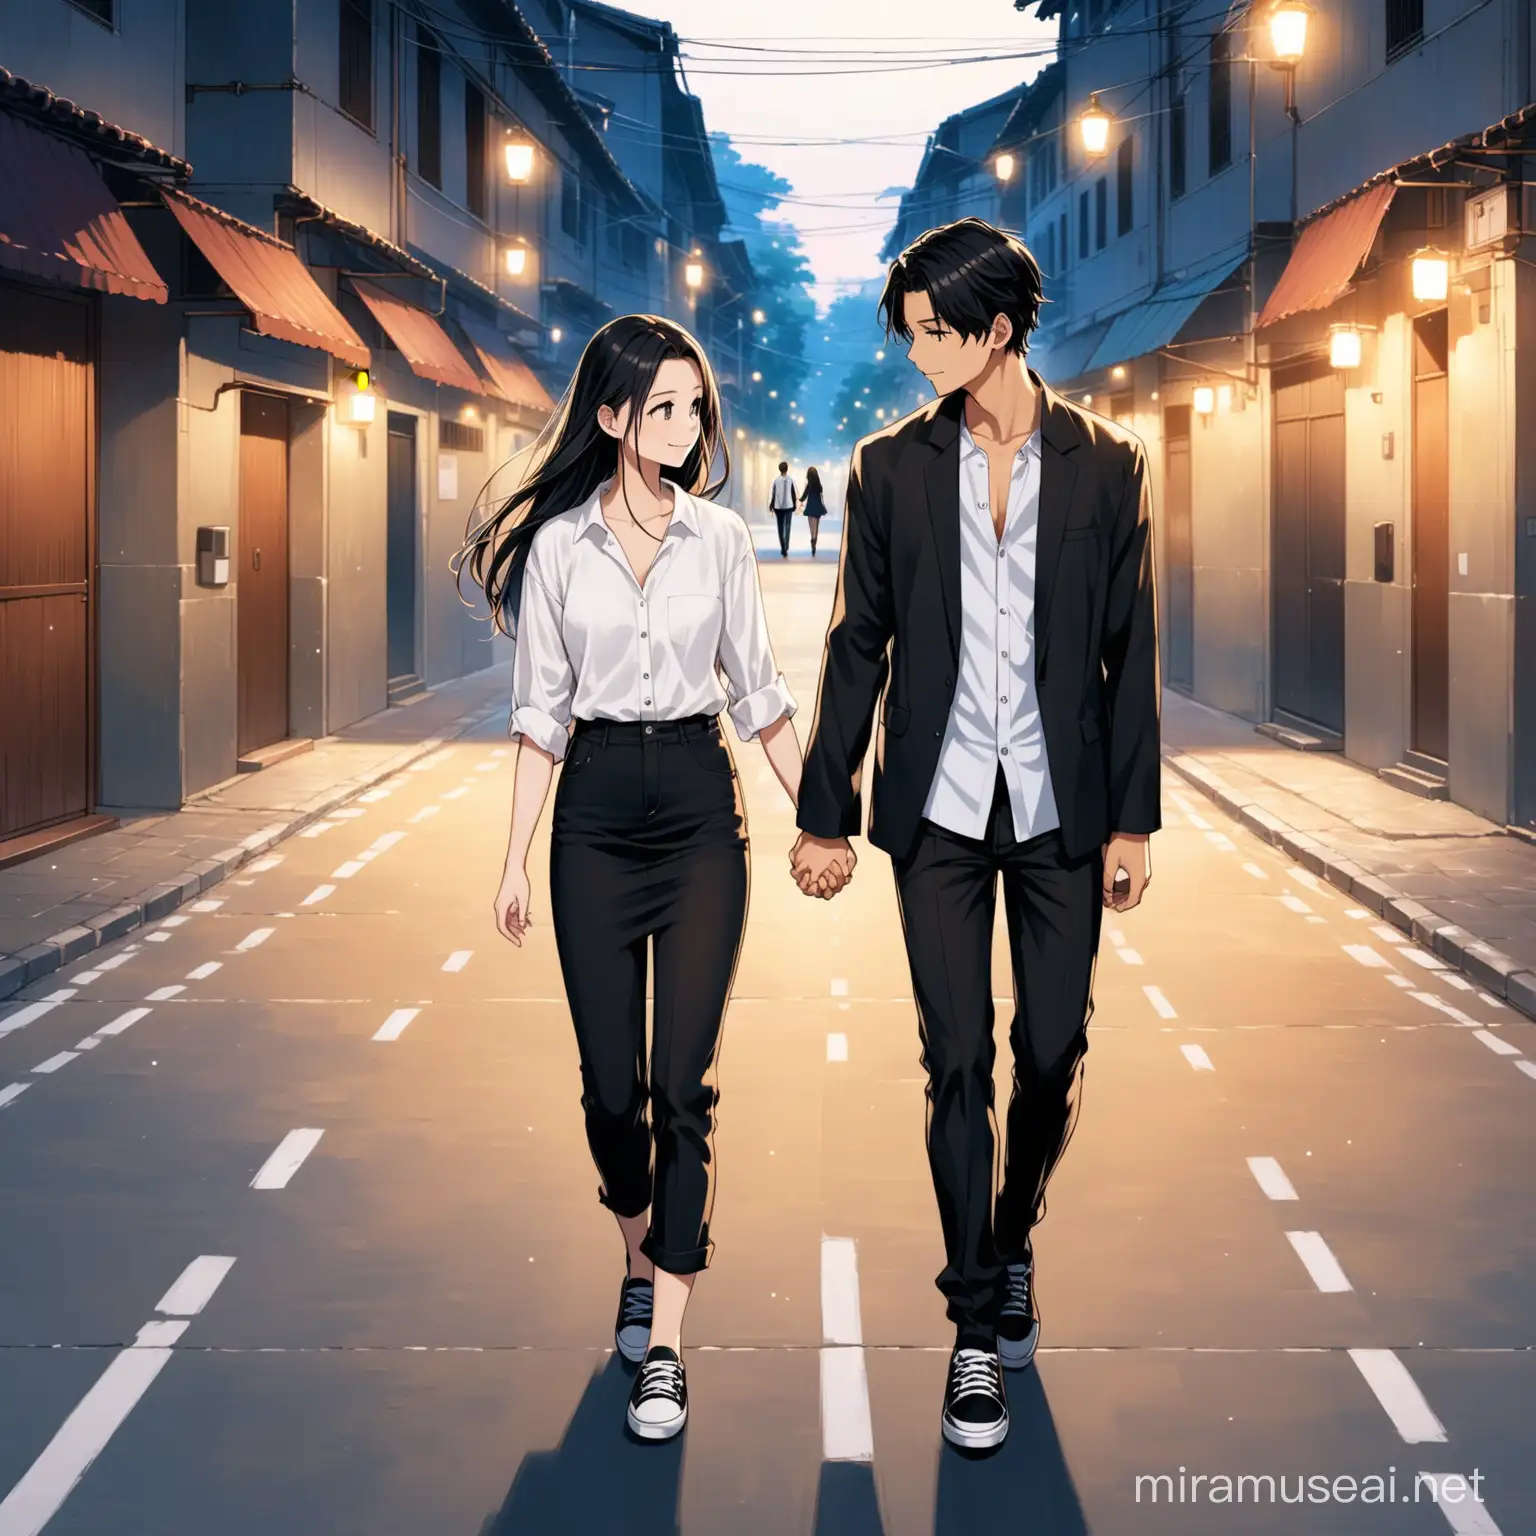 In the very well-lit street, seen from the front, couple in love, walking together, 16 years old, young girl, tender look shy smile, open black linen tailored jacket and low-cut ivory silk shirt and black linen micro skirt and black pumps and her husband, a young man look like Akito from SAO with white shirt and jeans and black sneakers